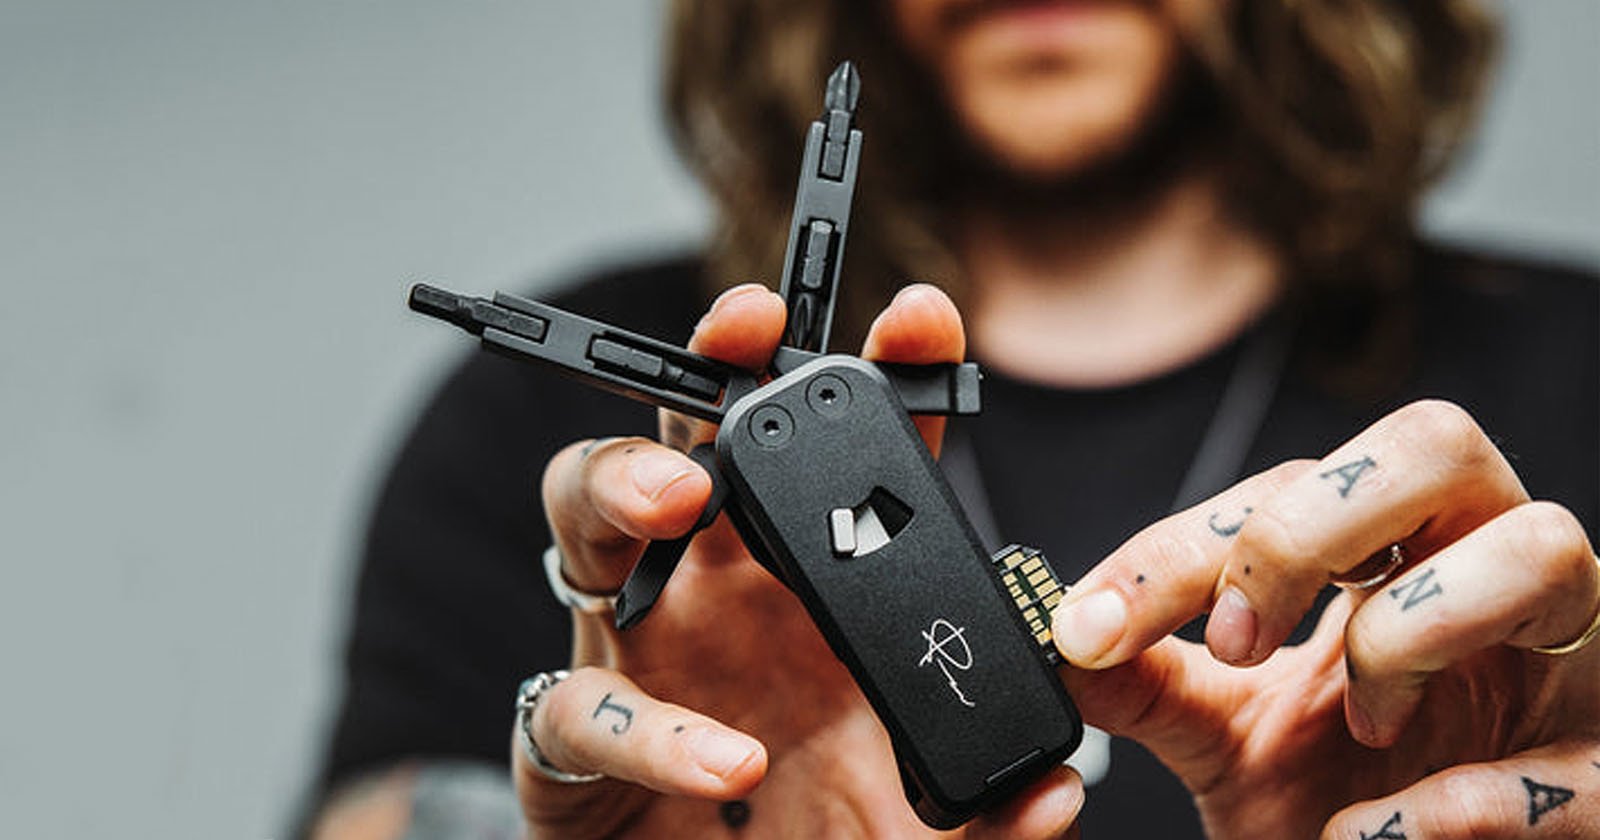 Peter McKinnon’s Camera Tool is a Swiss Army Knife for Photographers